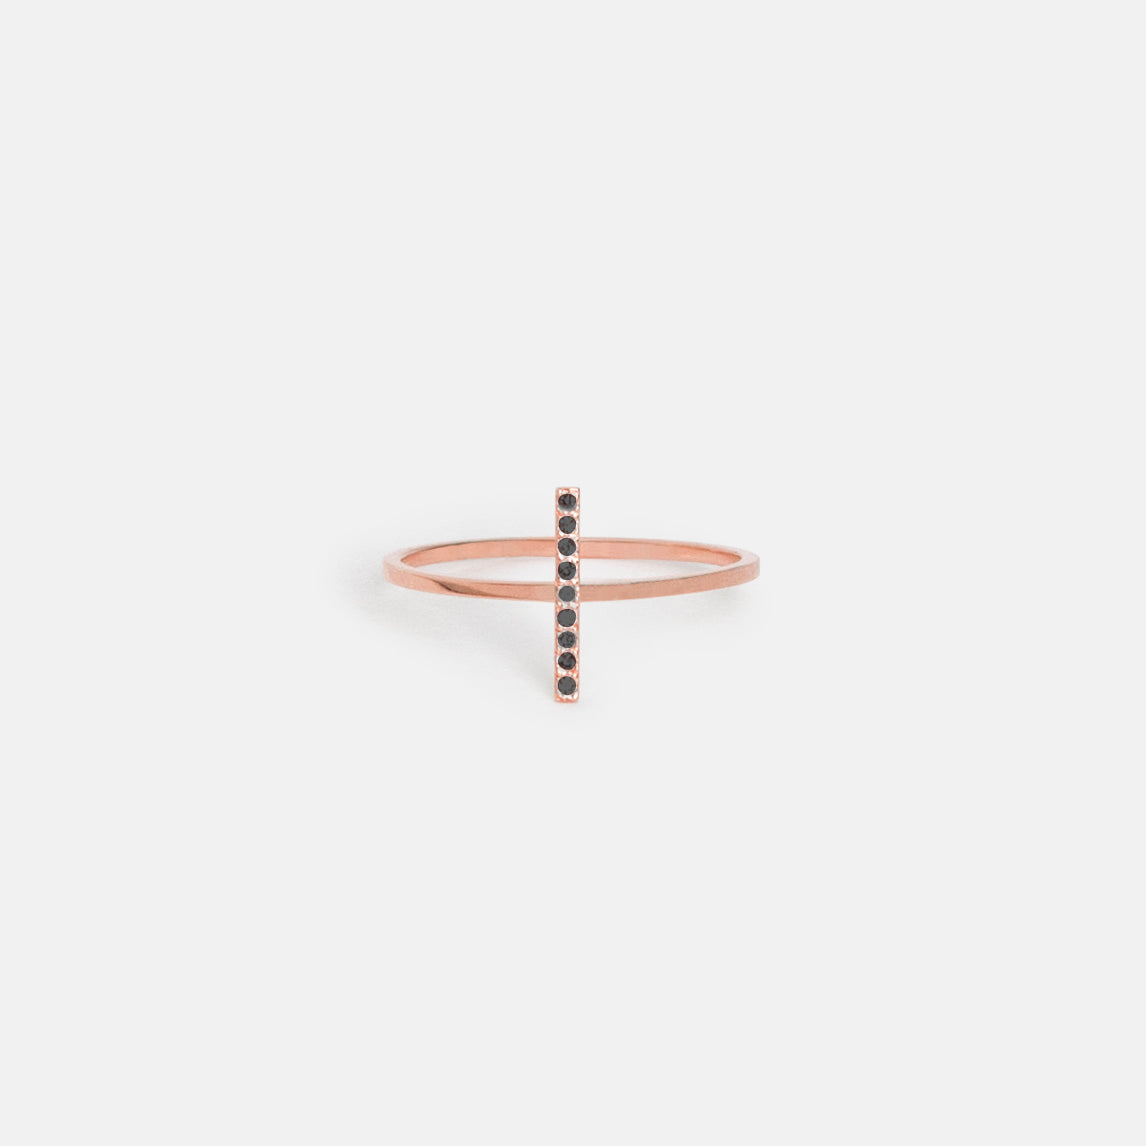 Steva Thin Ring in 14k Rose Gold set with Black Diamonds by SHW Fine Jewelry